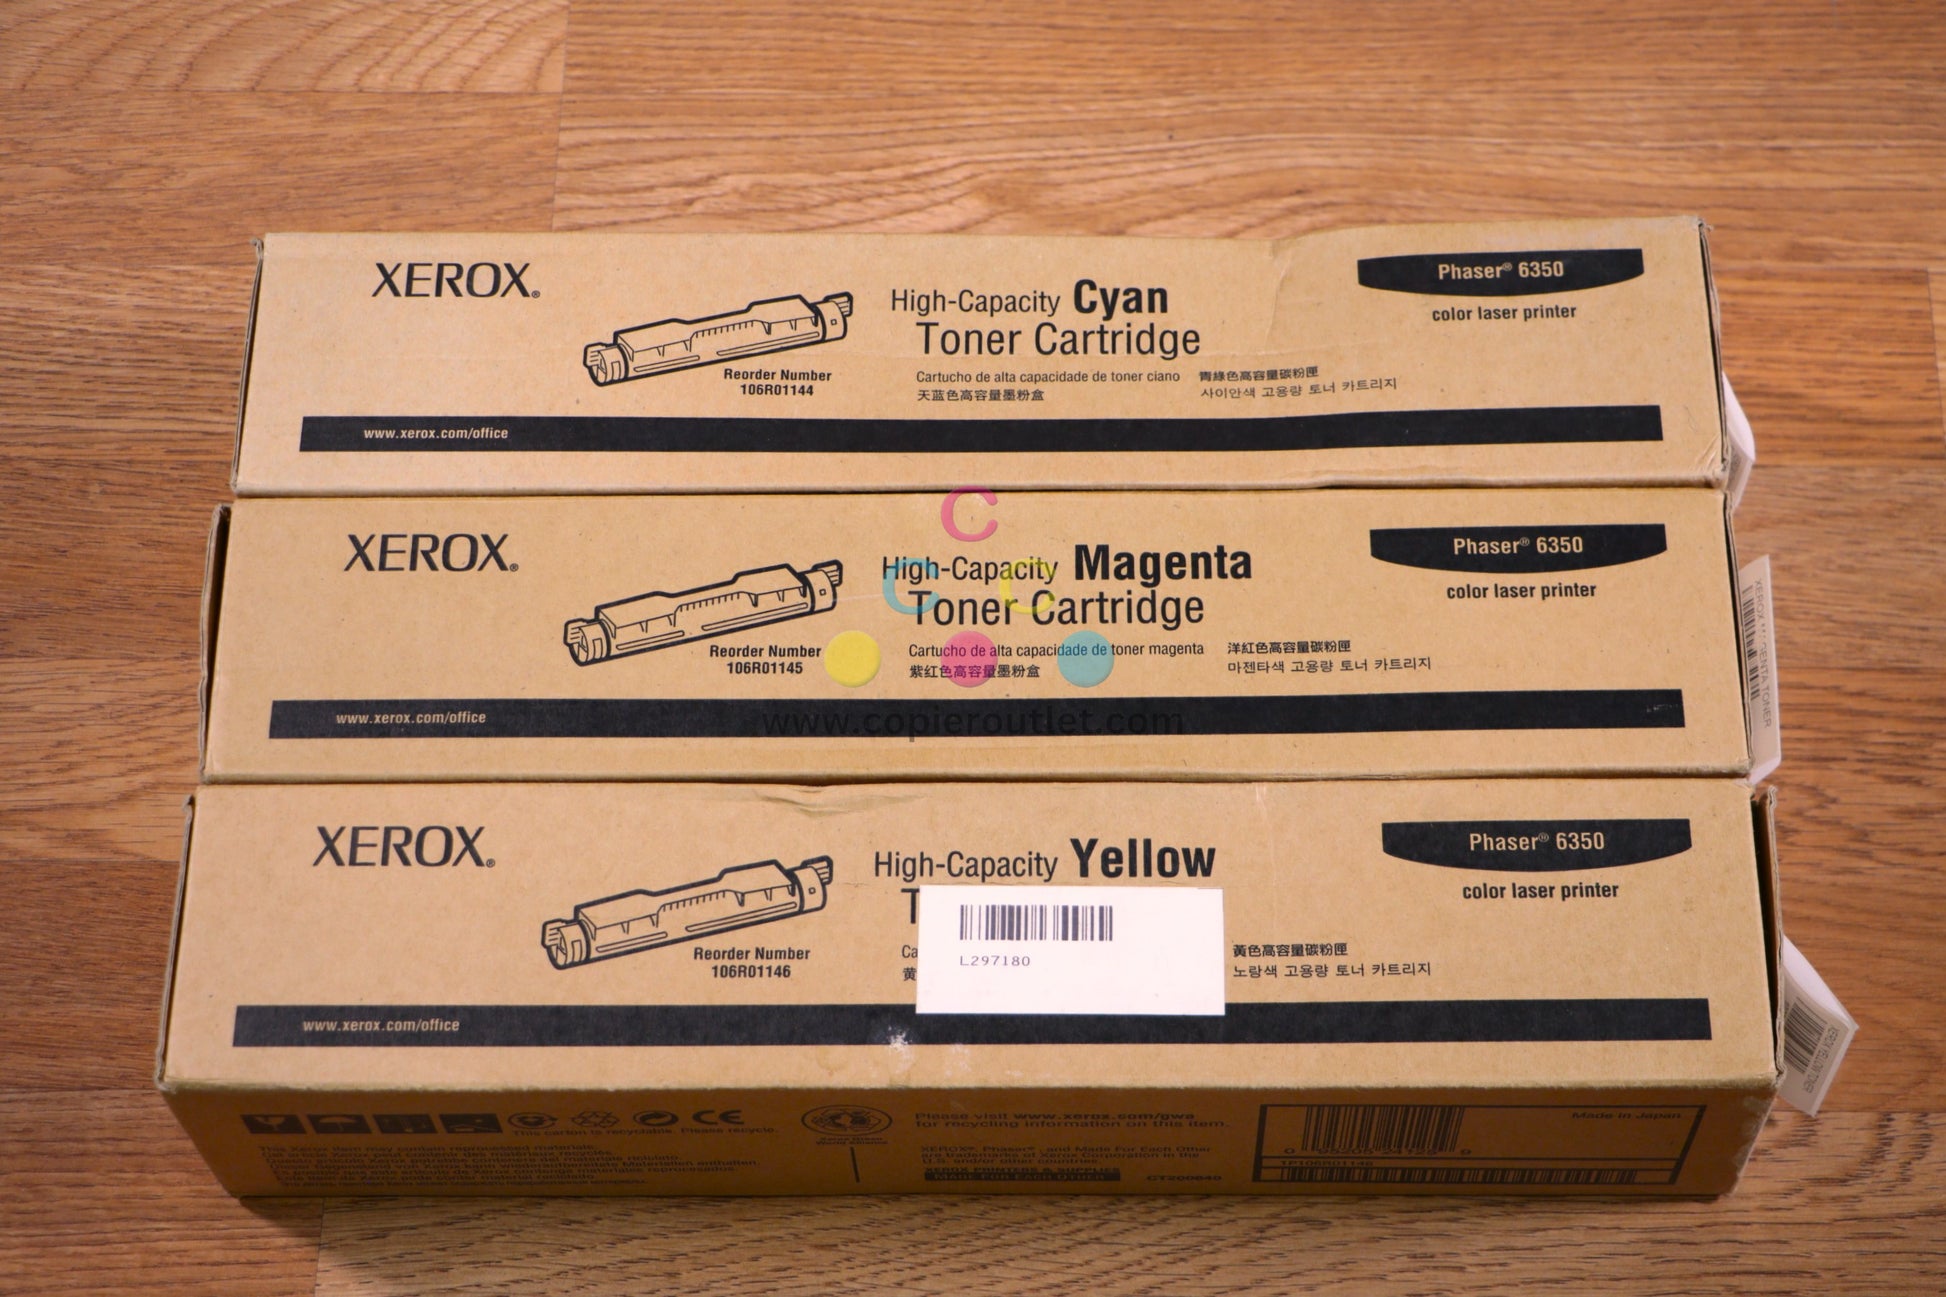 Xerox Phaser 6350 CMY Toner Cartridges 106R01144, 45, 46 For Phaser 6300 / 6350 - copier-clearance-center